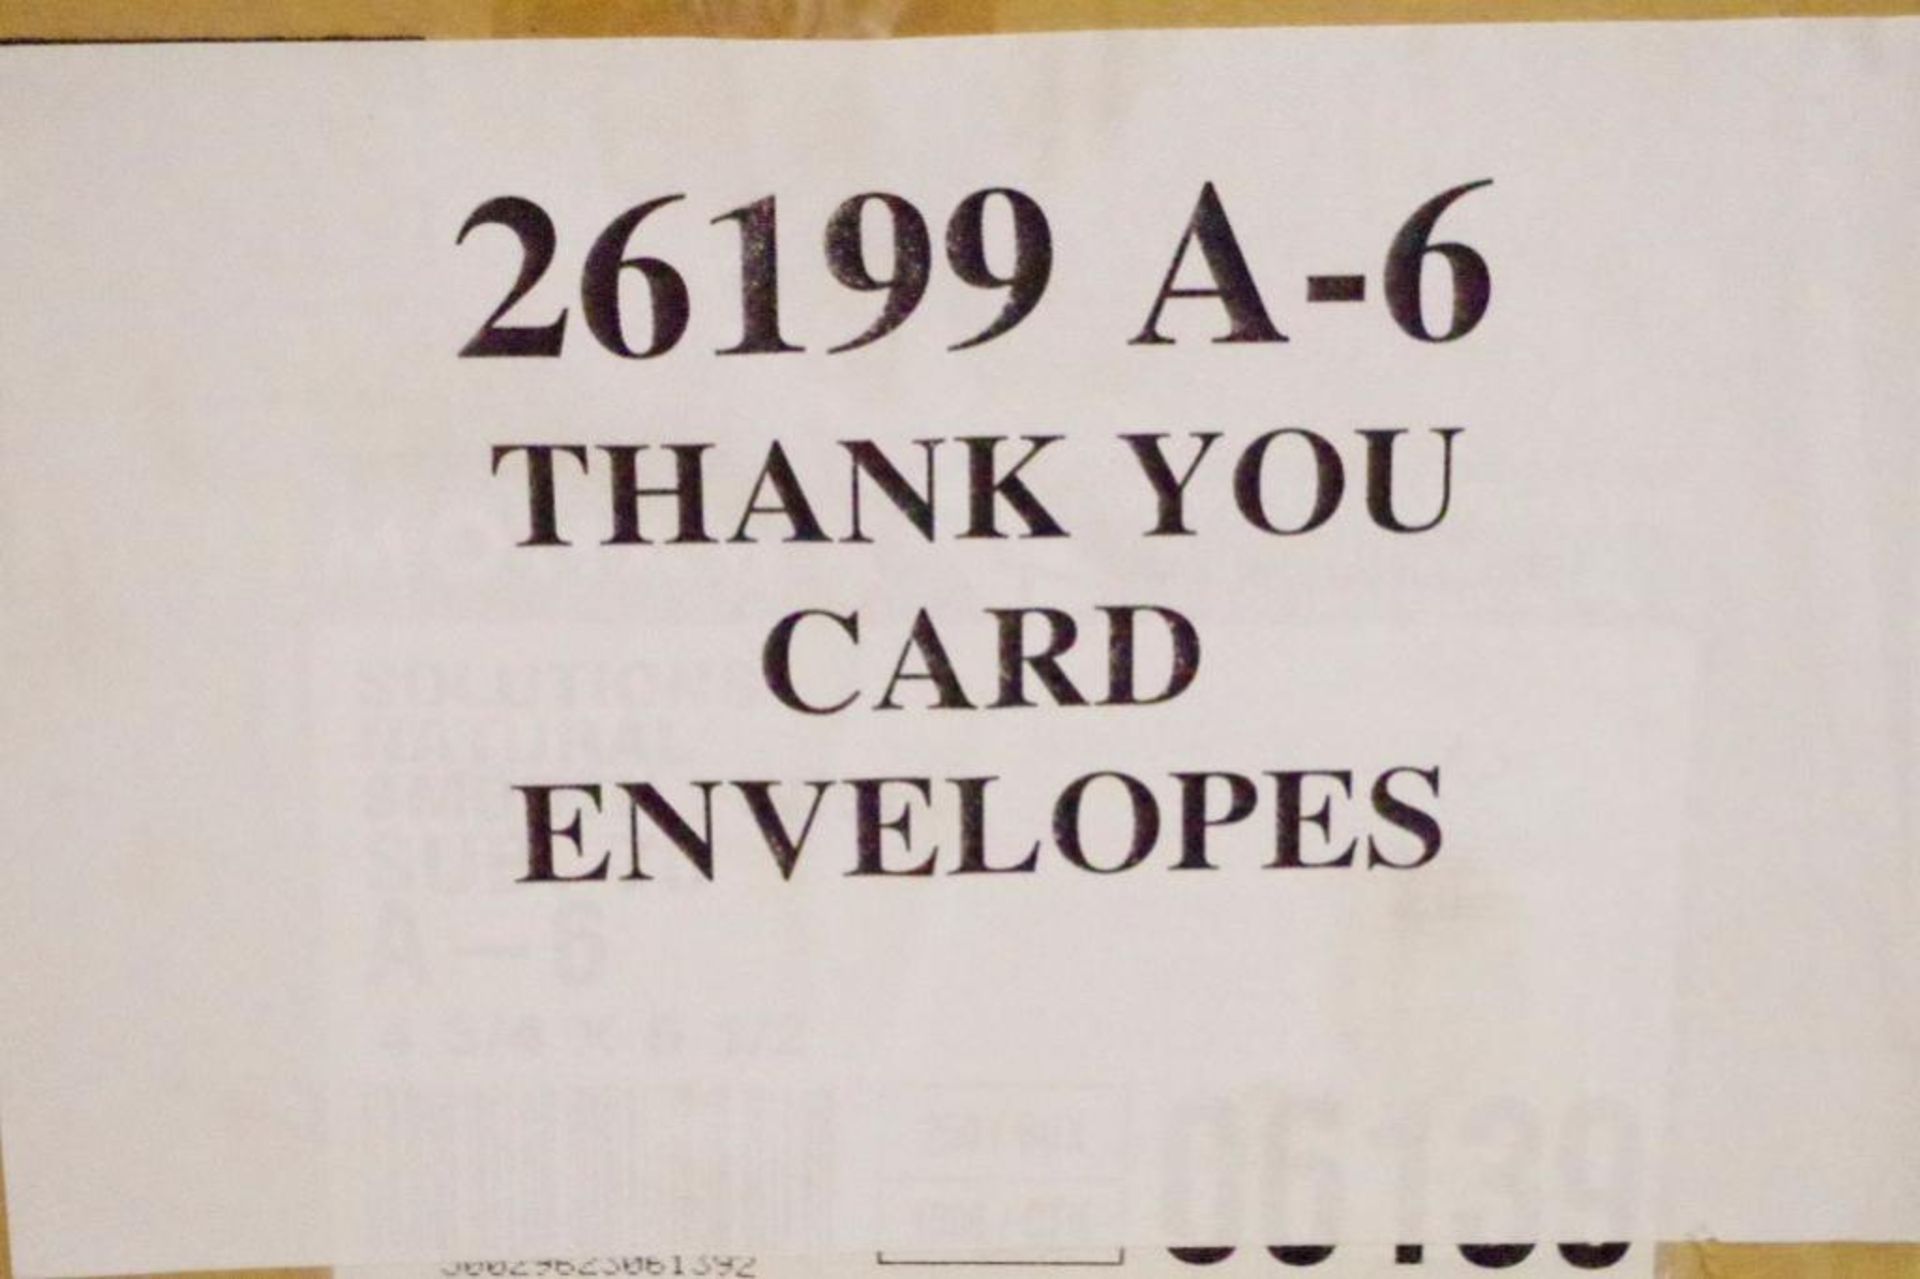 [QTY] Shelf Lot: (11250) Envelopes, (200) Sheets Avery Labels & (9) Packs "Thank You" Cards - Image 8 of 8